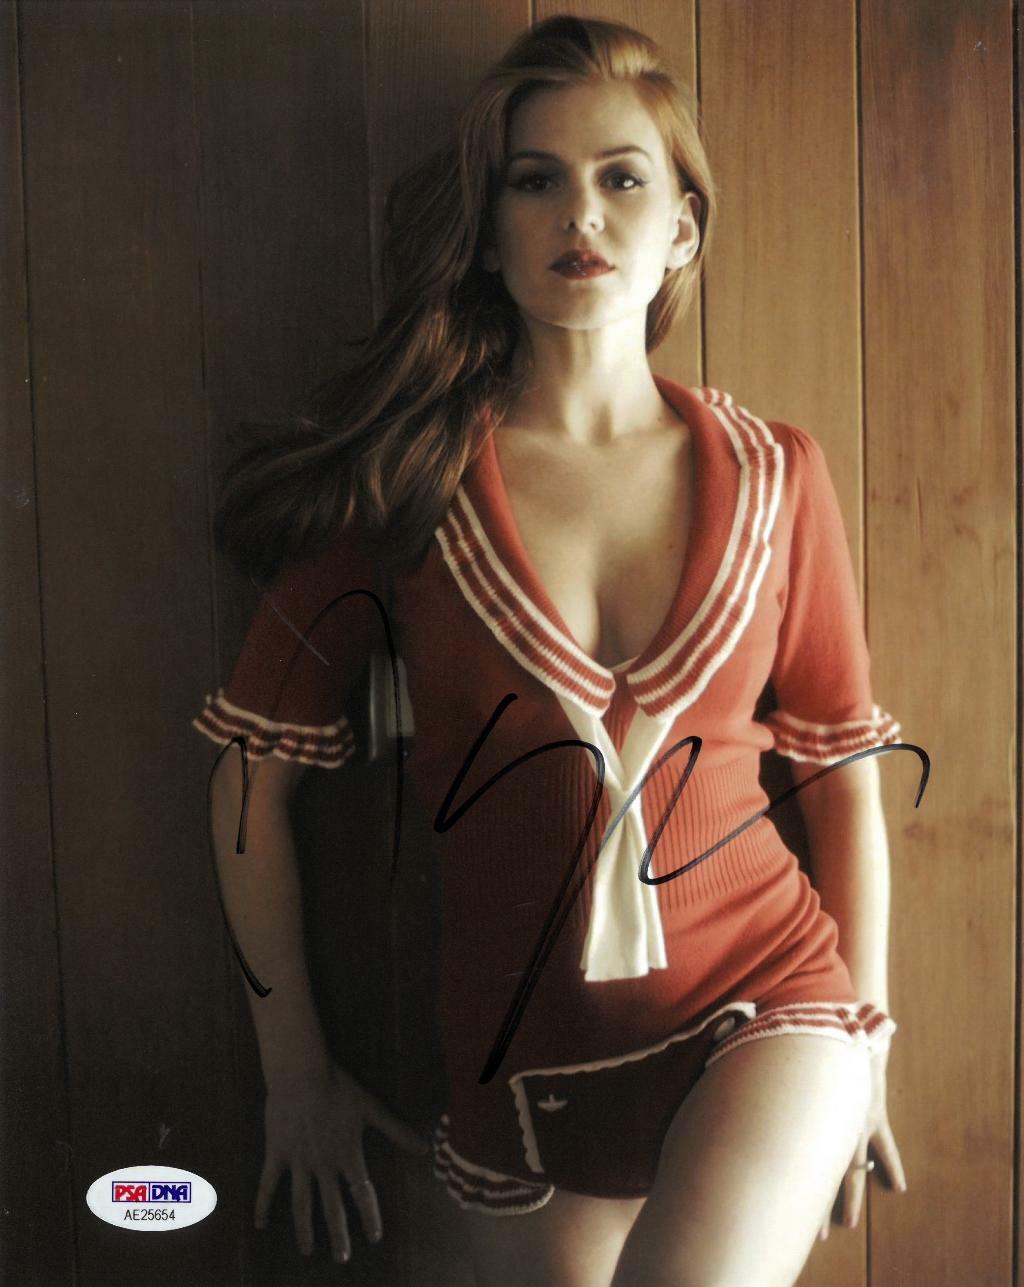 Isla Fisher Signed Authentic Autographed 8x10 Photo Poster painting PSA/DNA #AE25654